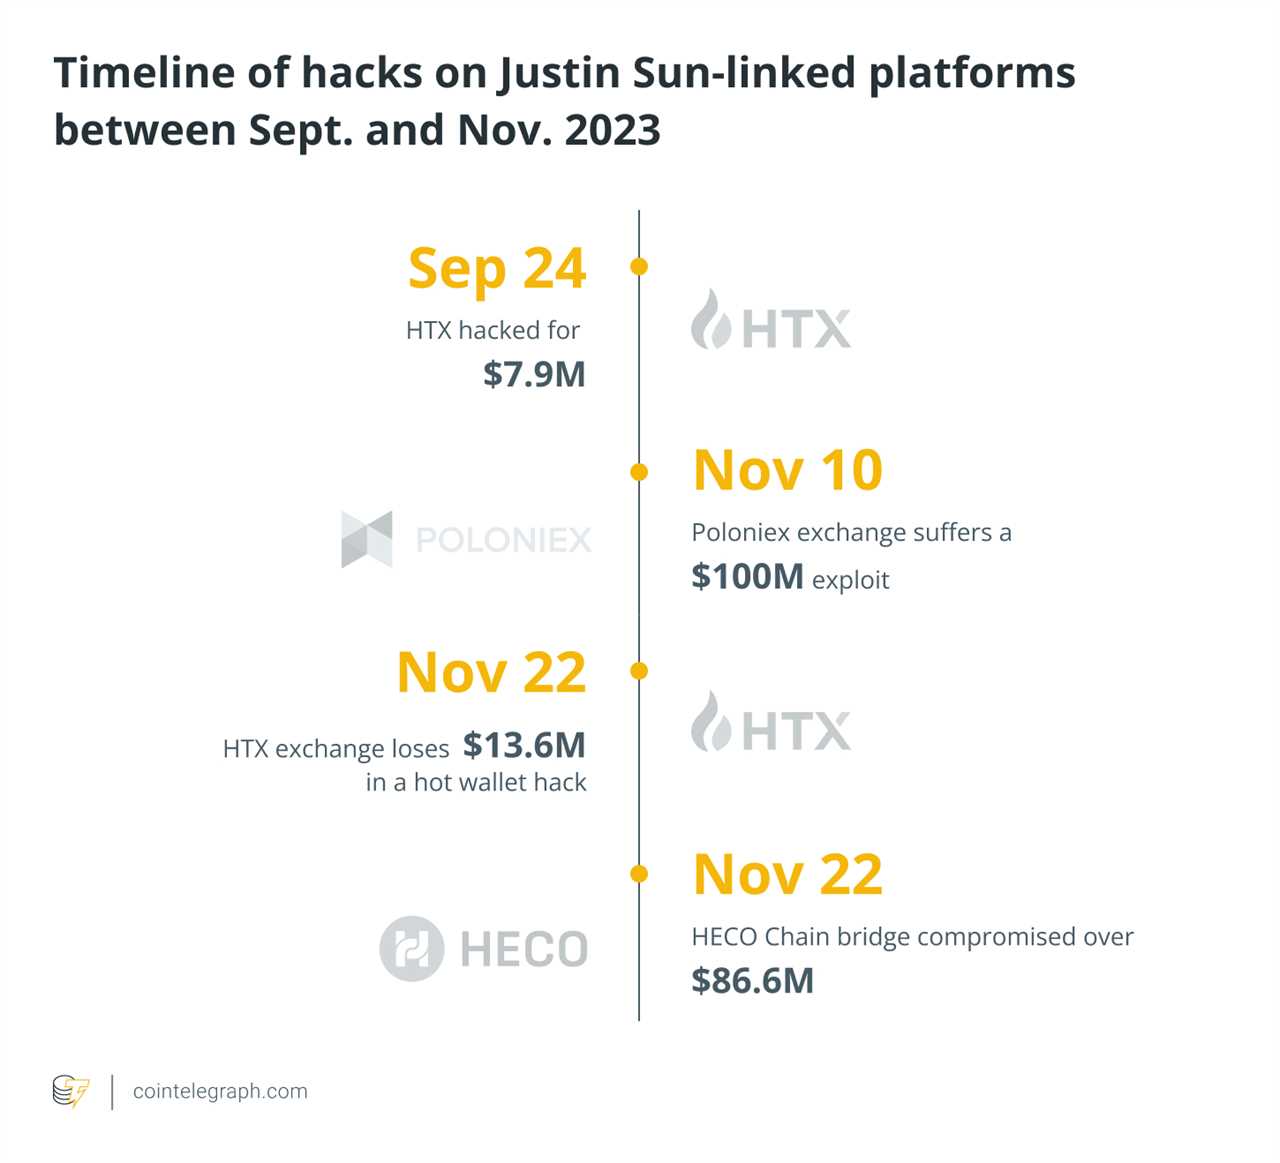 Tron Founder Justin Sun's Crypto Platforms Hacked Multiple Times in Recent Months